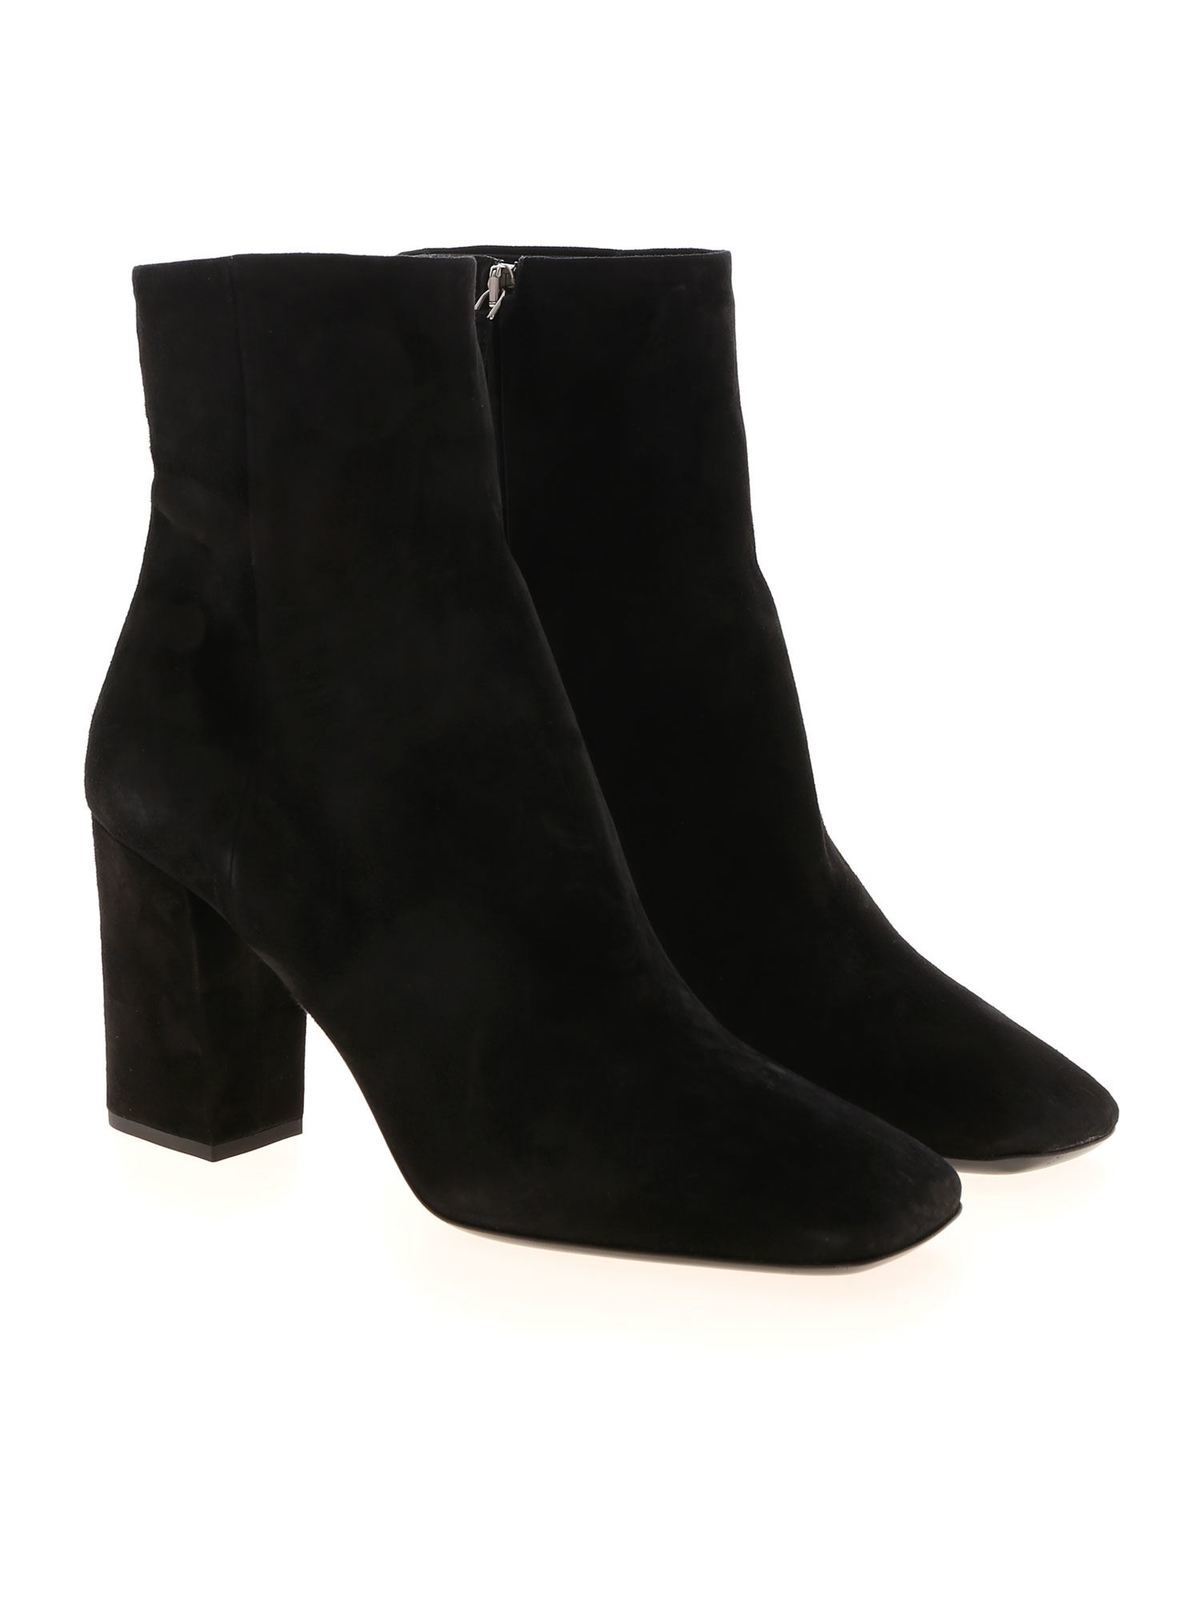 Prada - Suede ankle boots in black 